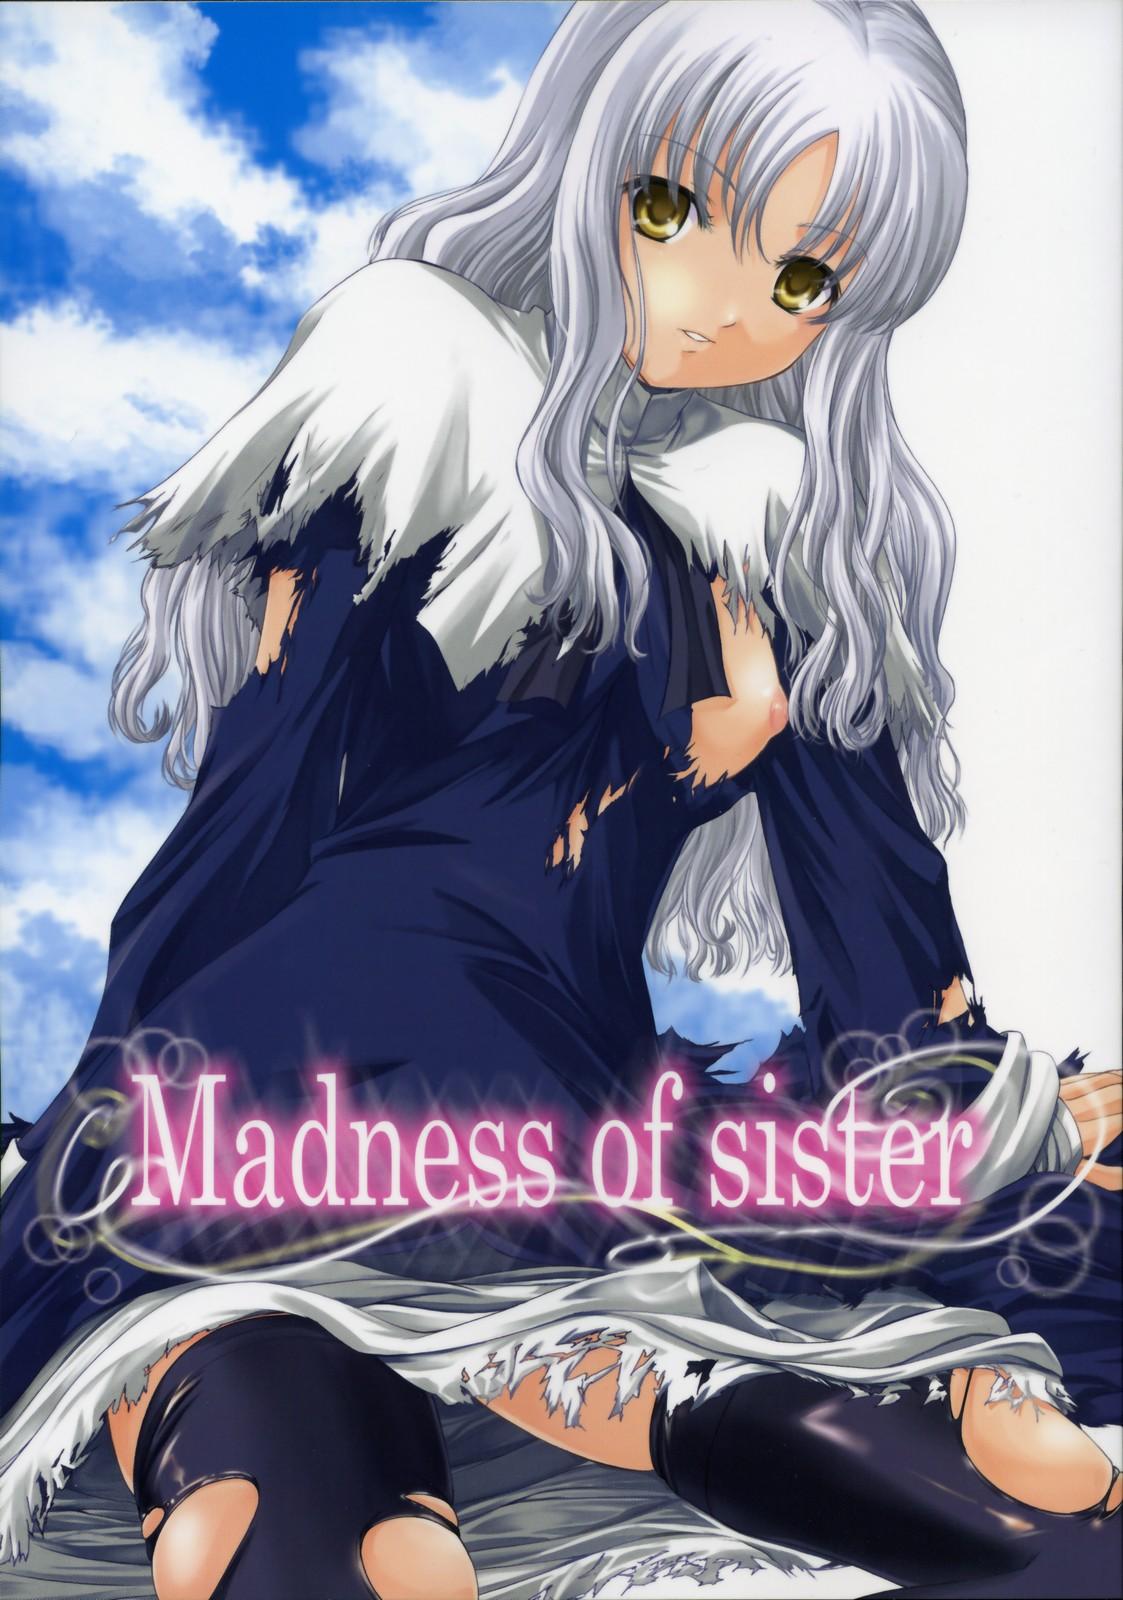 Madness of sister 0